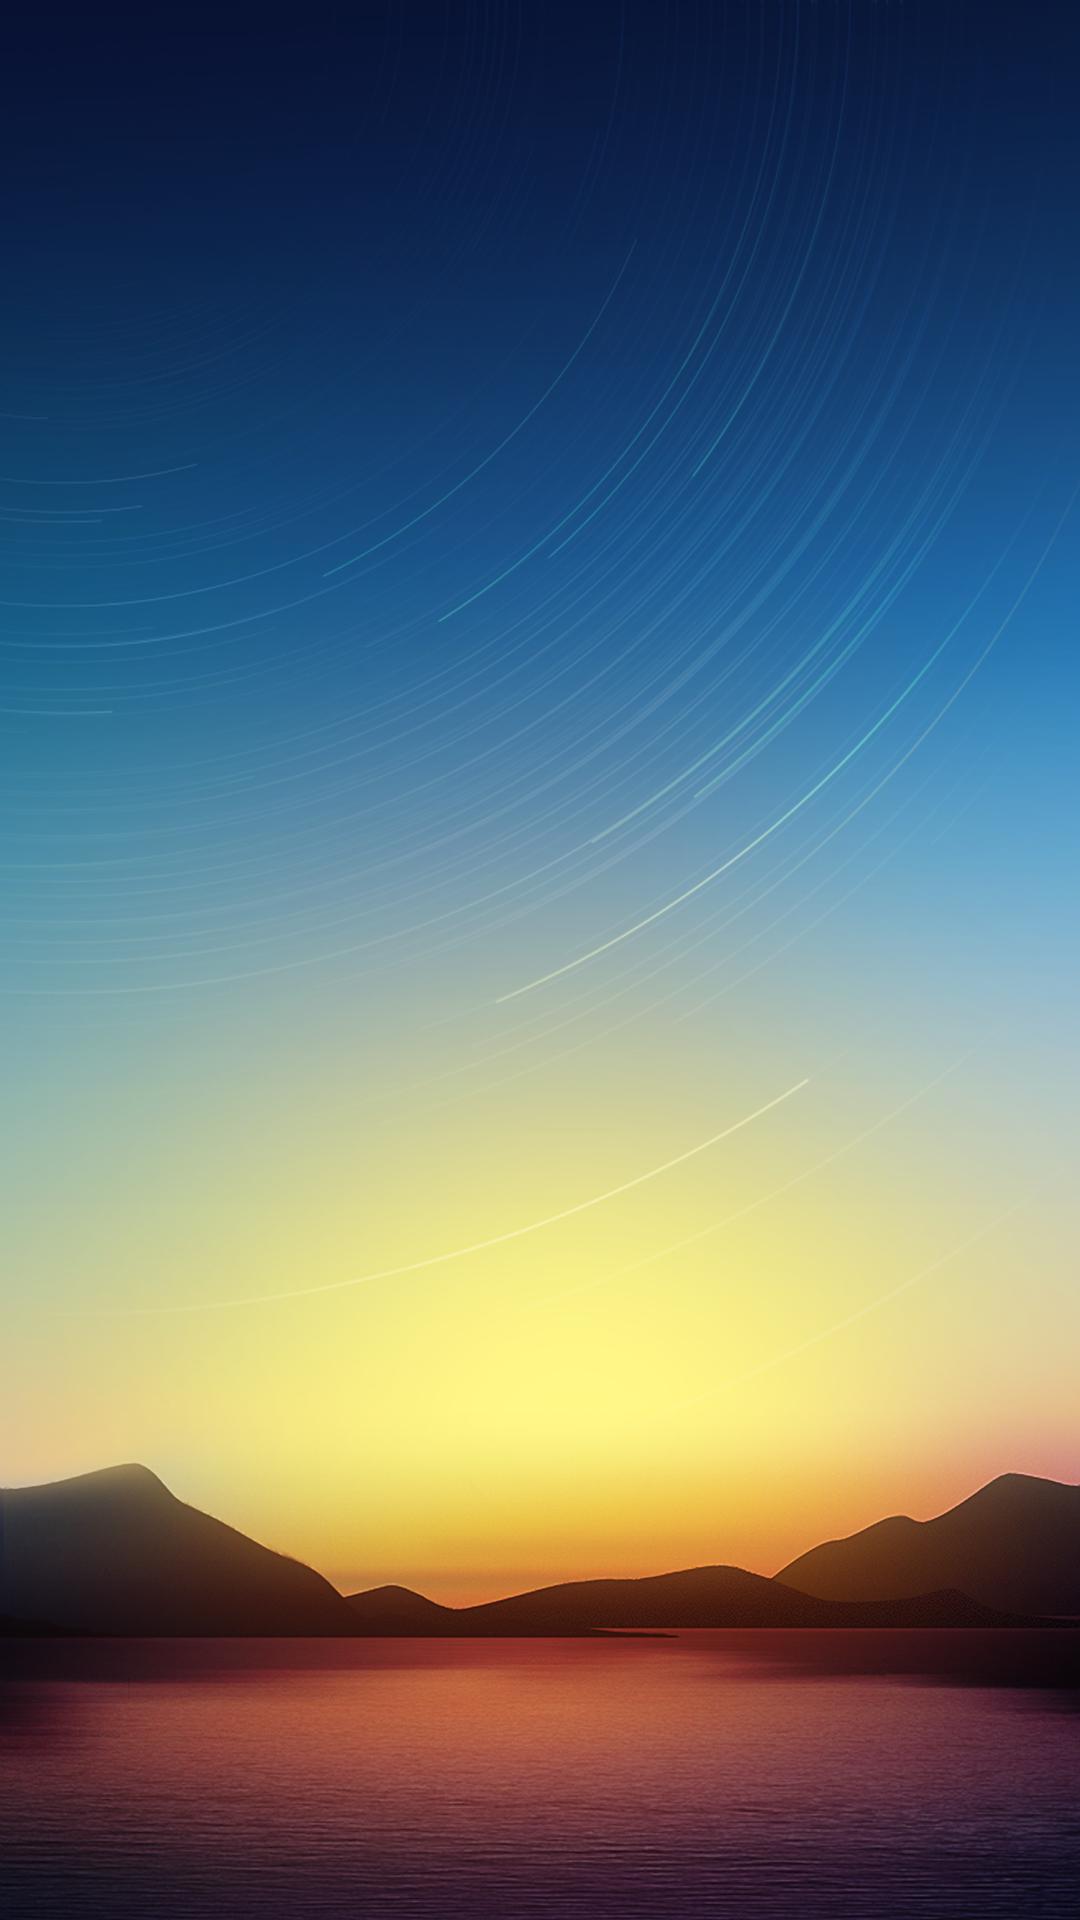 Upgrade Your Screen Size with These Large Phone Wallpapers